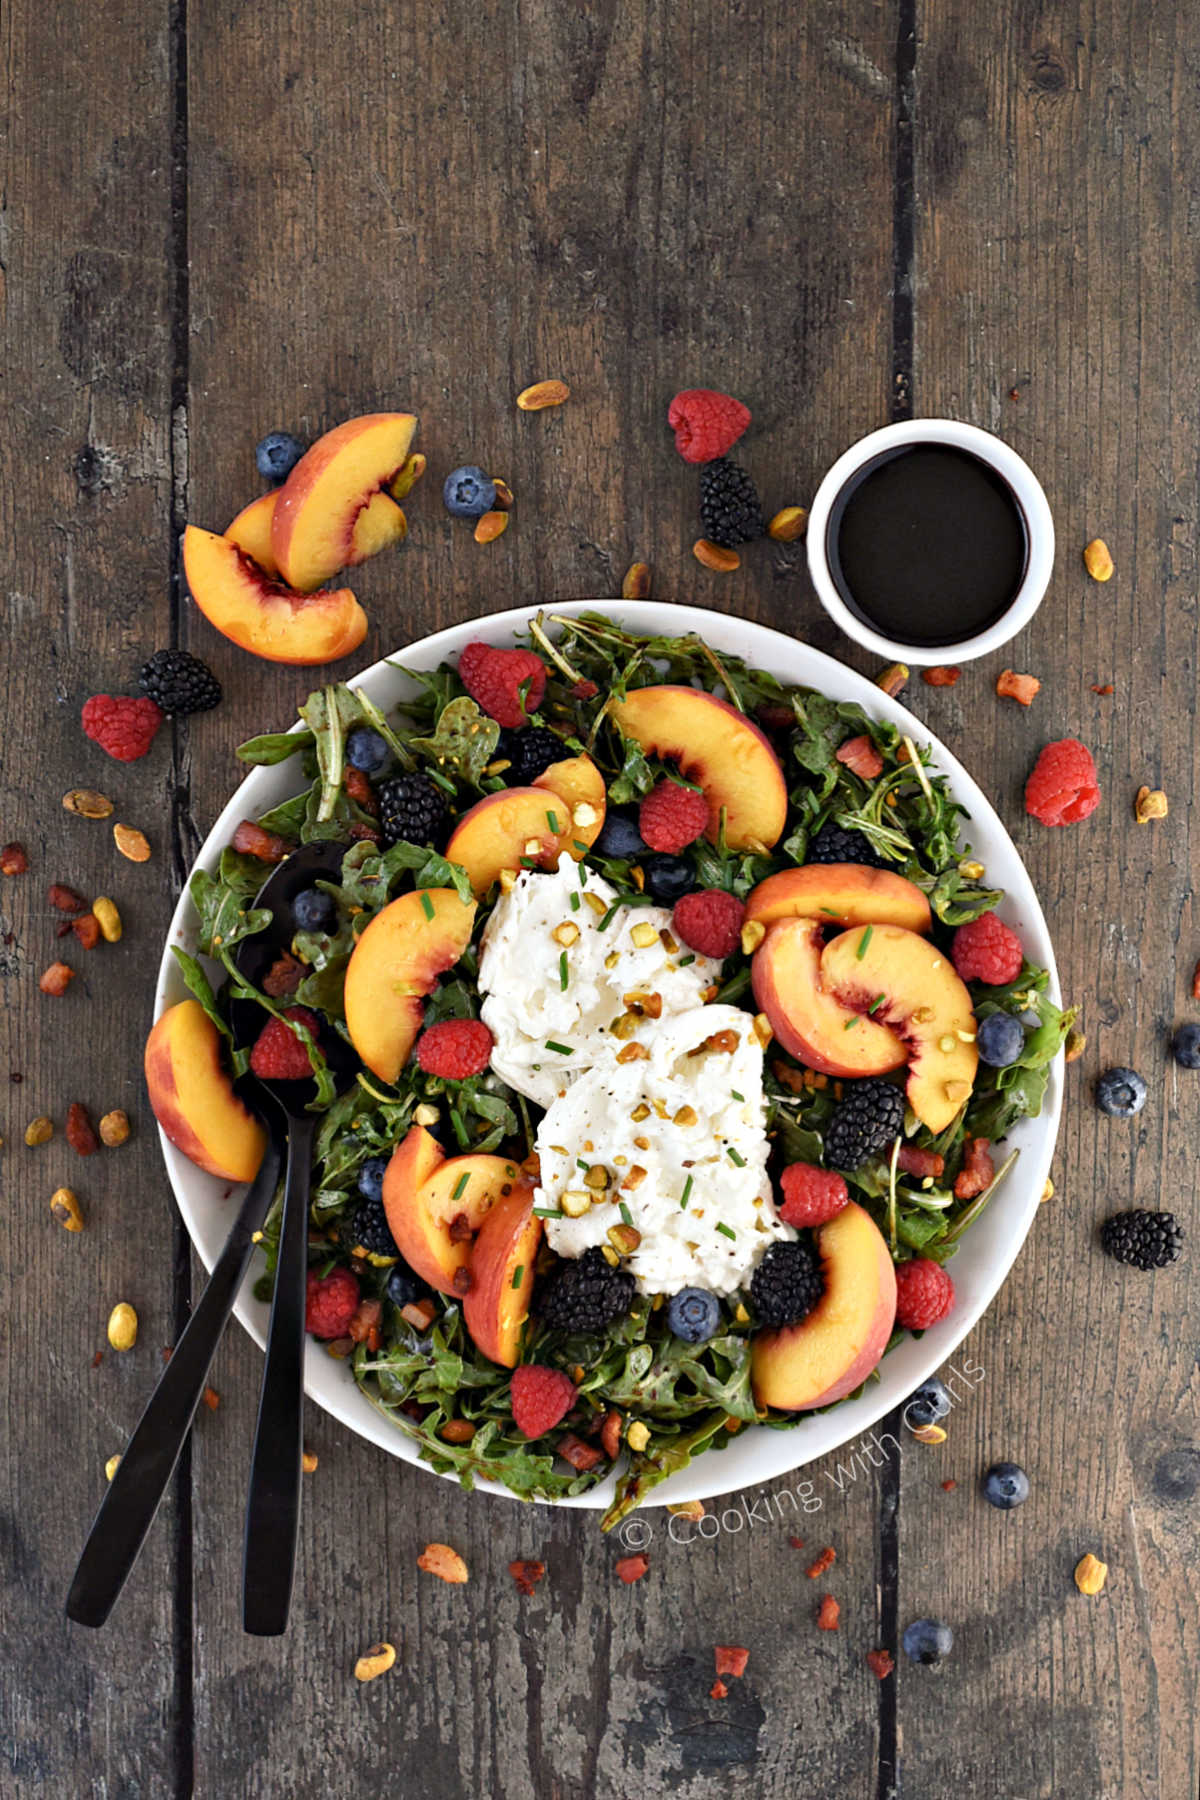 Sliced peaches, fresh berries, and fresh burrata on a bed of arugula with additional ingredients scattered around the platter.